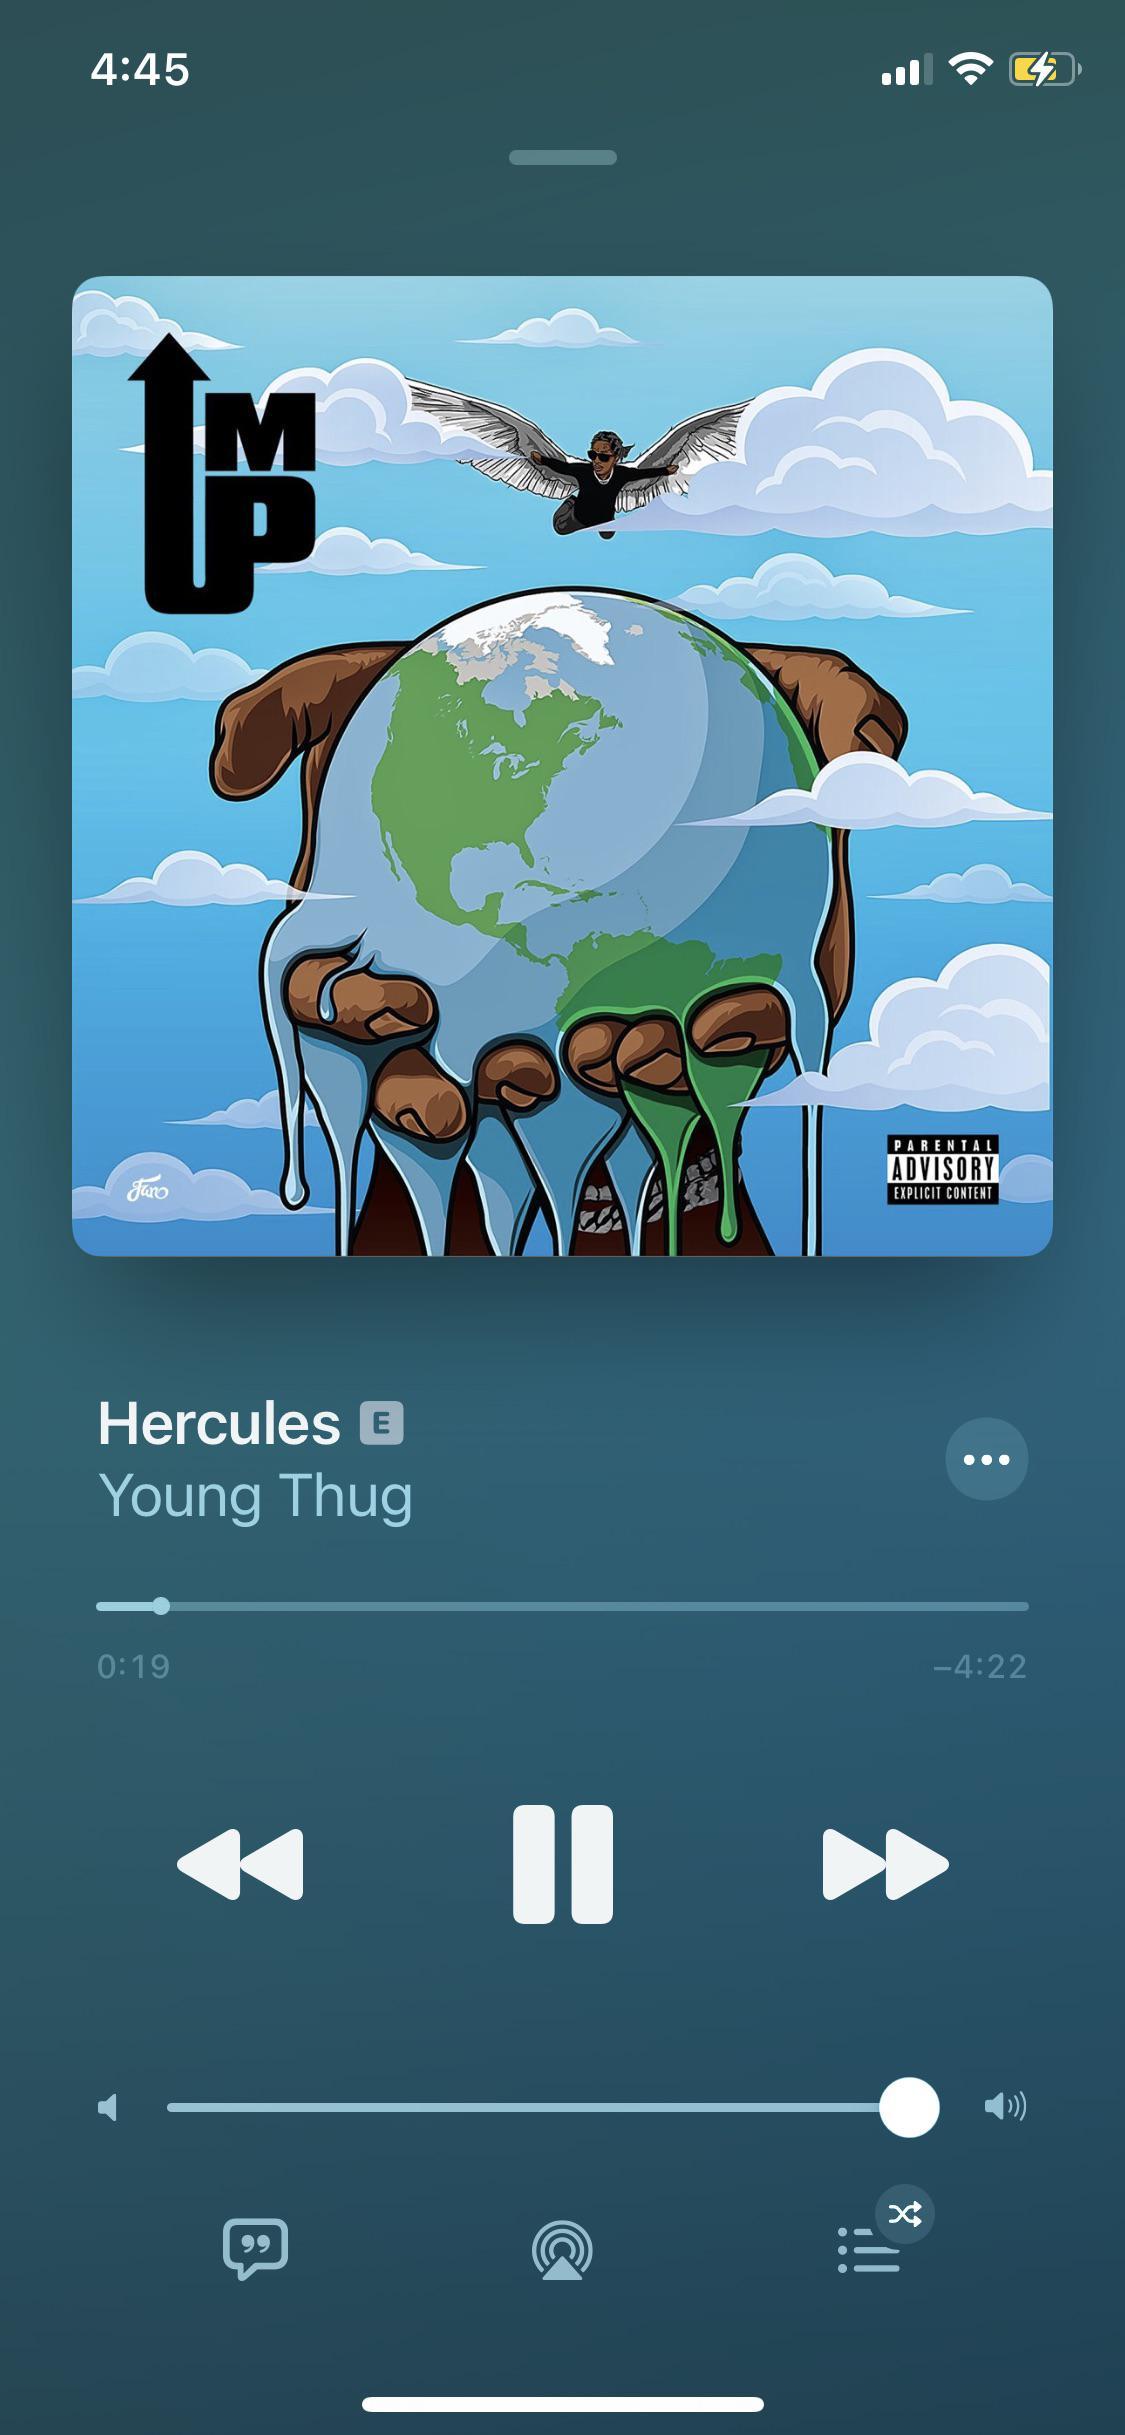 Whats The Best Young Thug Song And Why Is It Hercules R Youngthug